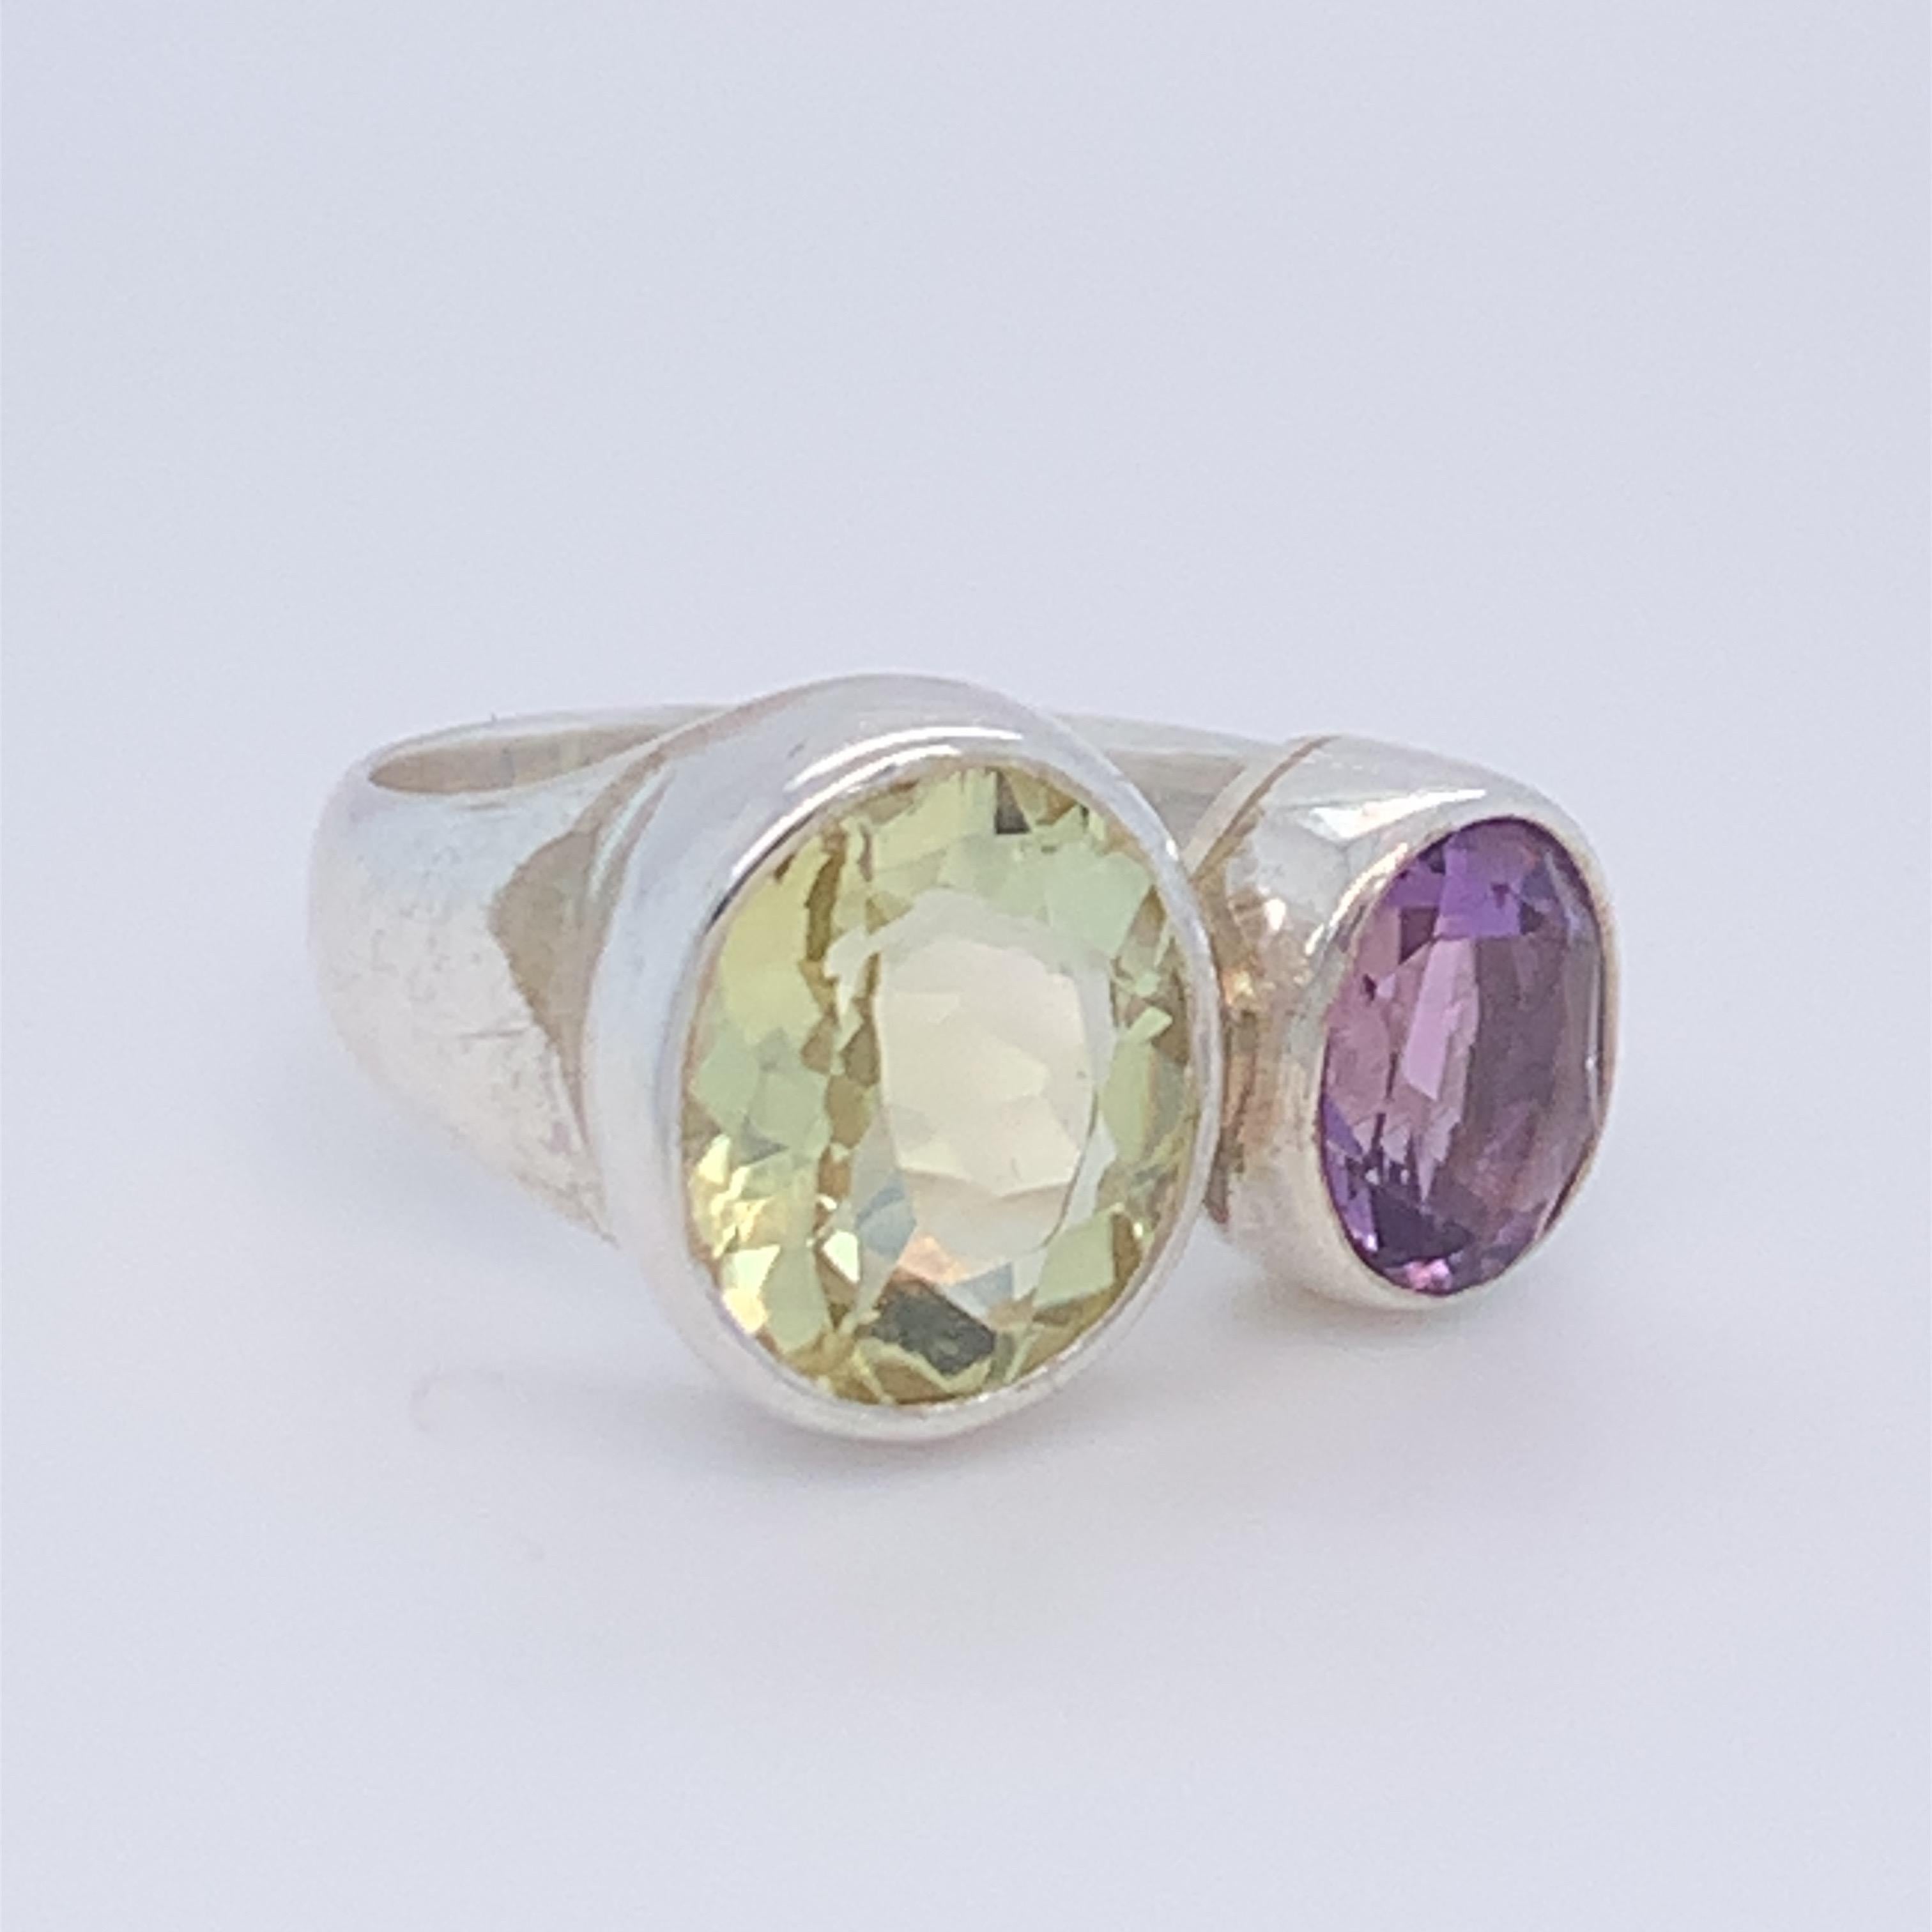 This beautiful two stone ring boasts two oval lemon citrine and amethyst. Birthstone of the month of February. it is simple, plain and suitable for day wear. Set in sterling silver and hand made by master craftsman.
Total weight of stone : 7.00ct